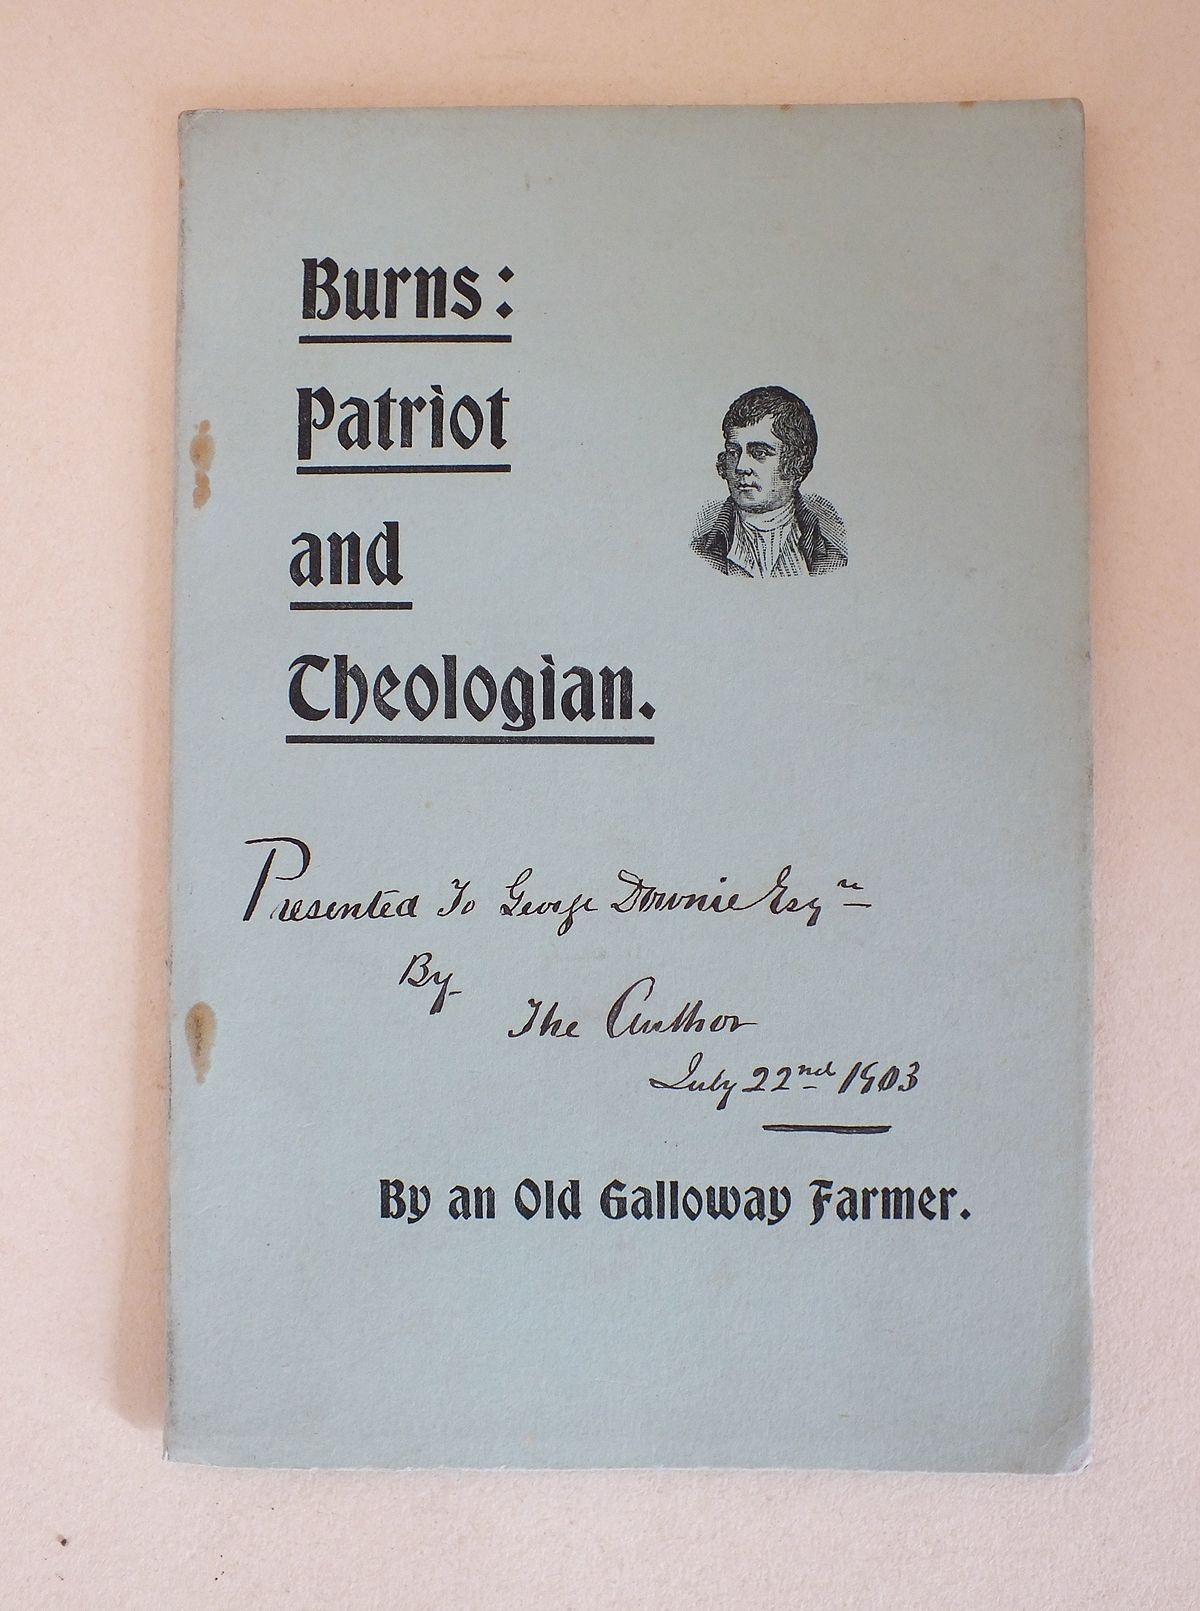 Burns: Patriot and Theologian by an Old Galloway Farmer